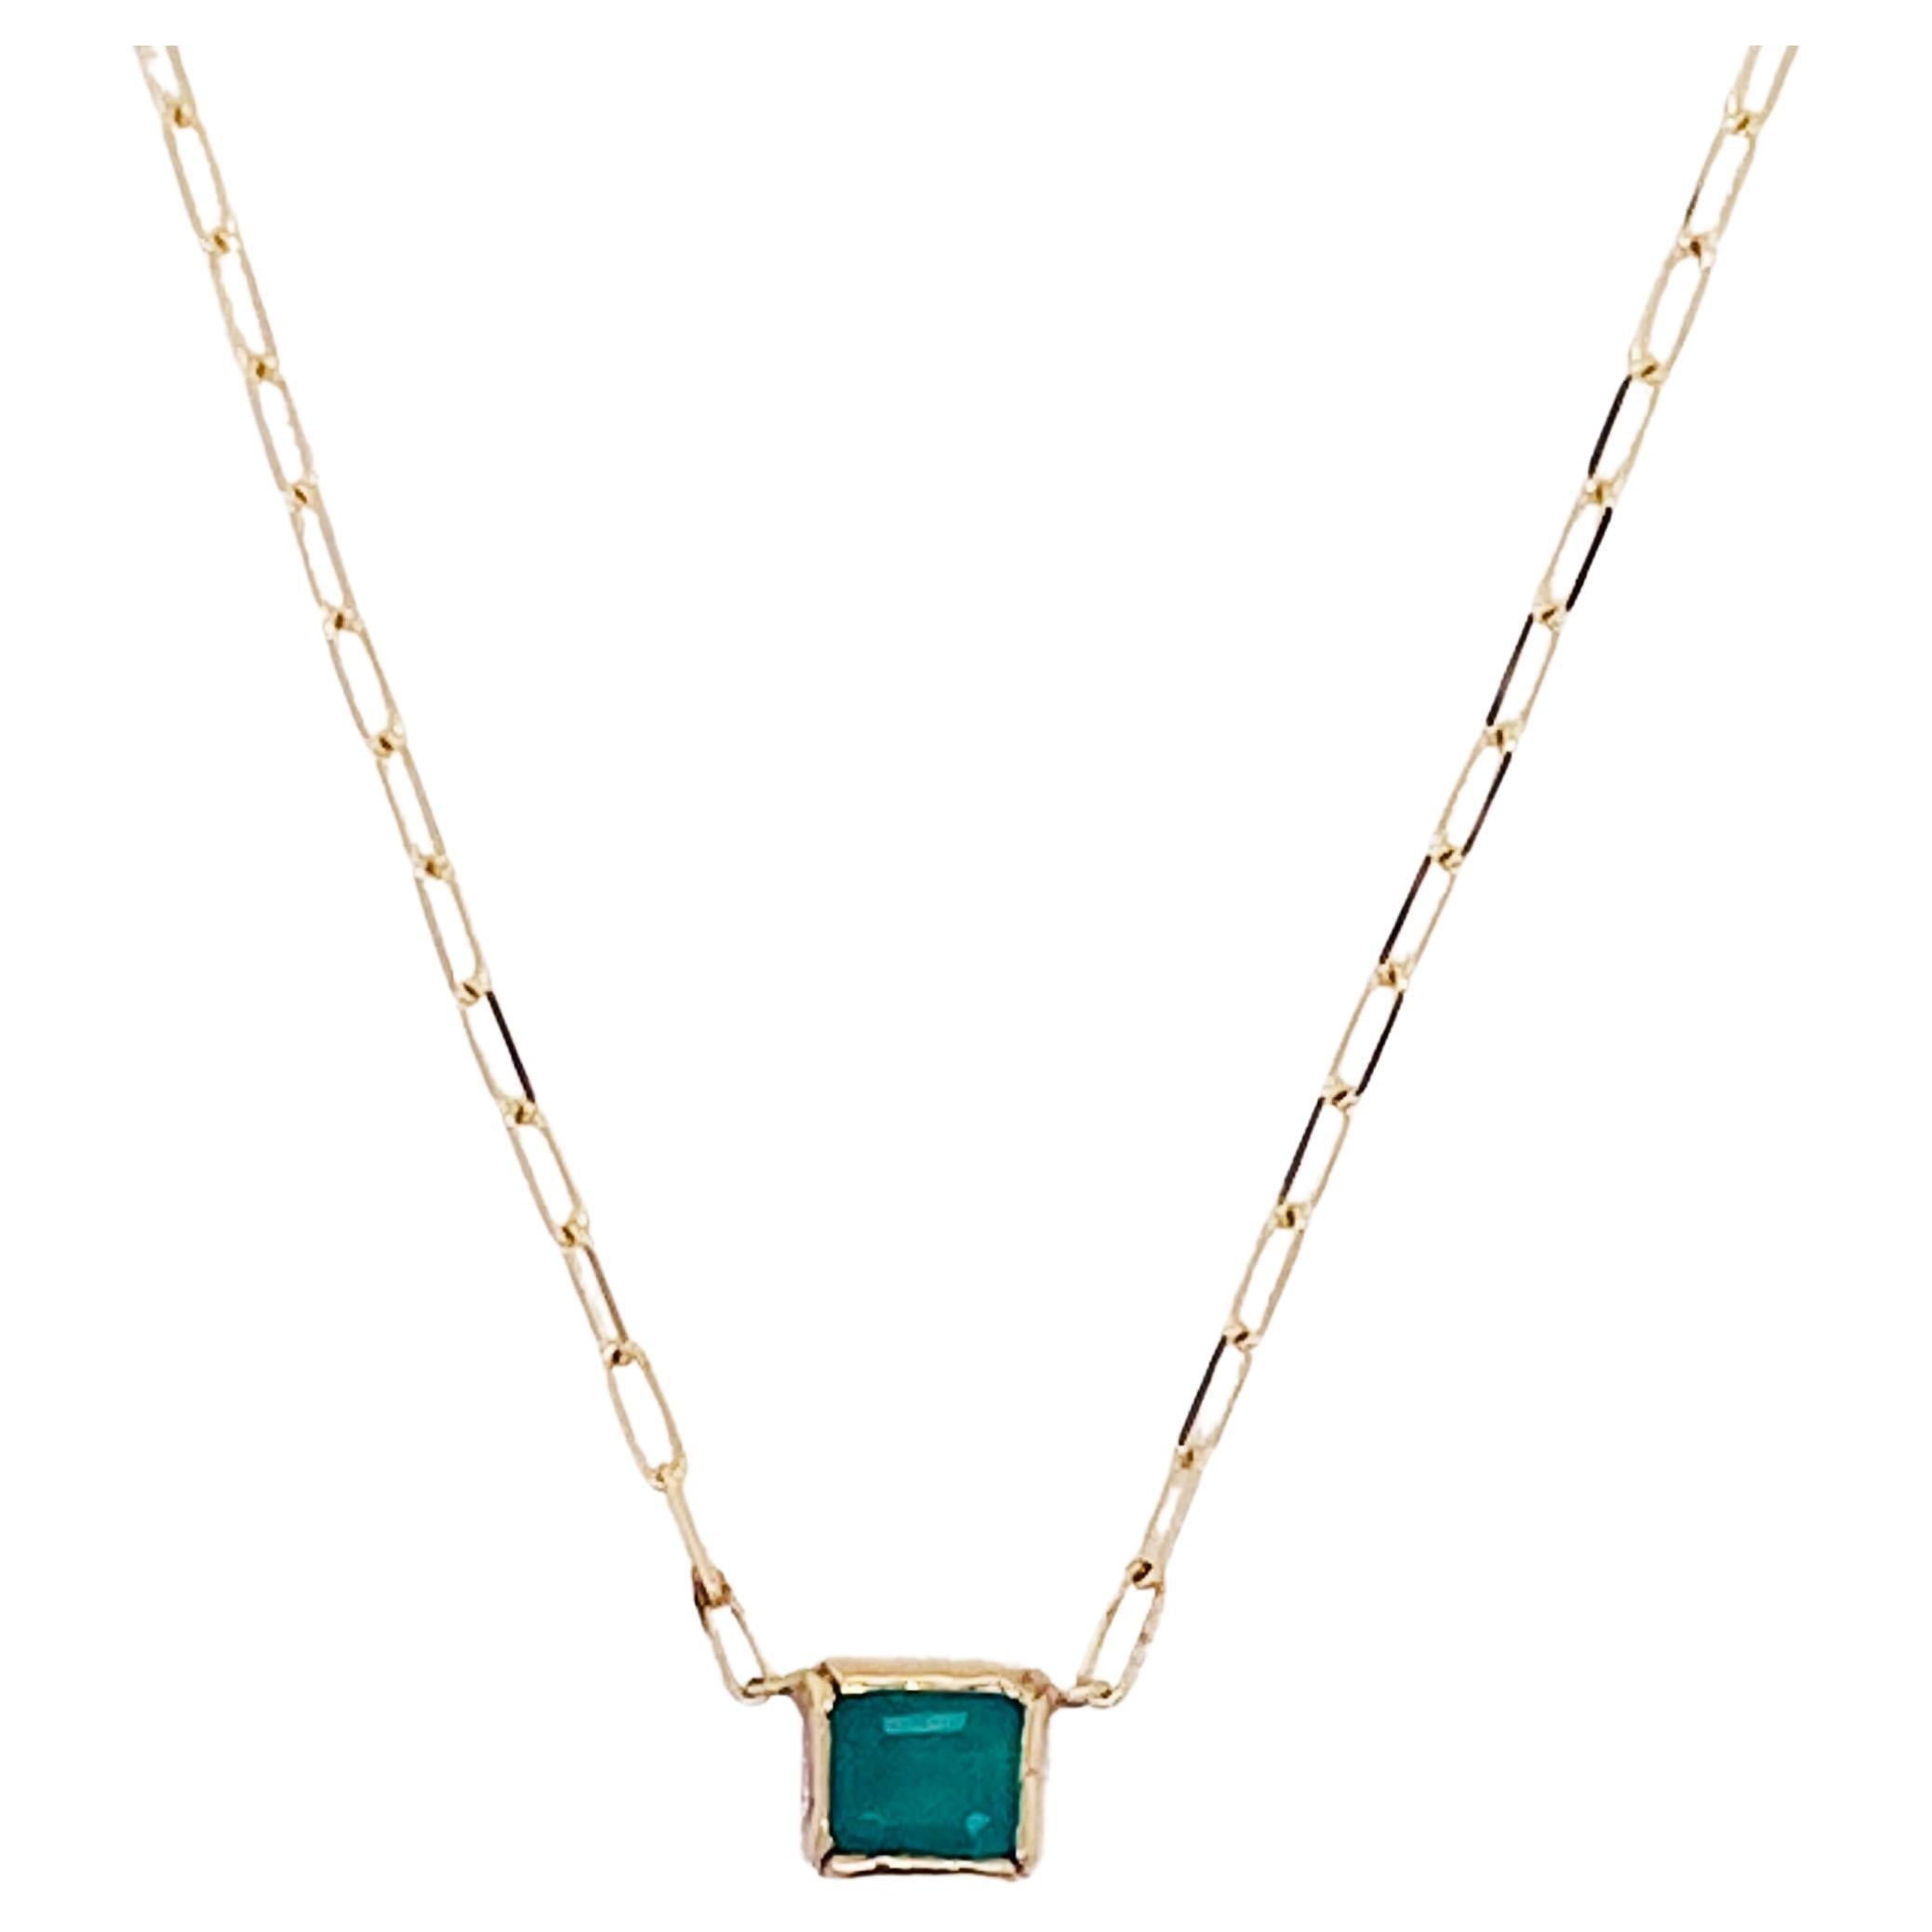 Itty Bitty Emerald Necklace 0.10ct Emerald Paperclip Necklace in 14ky Gold